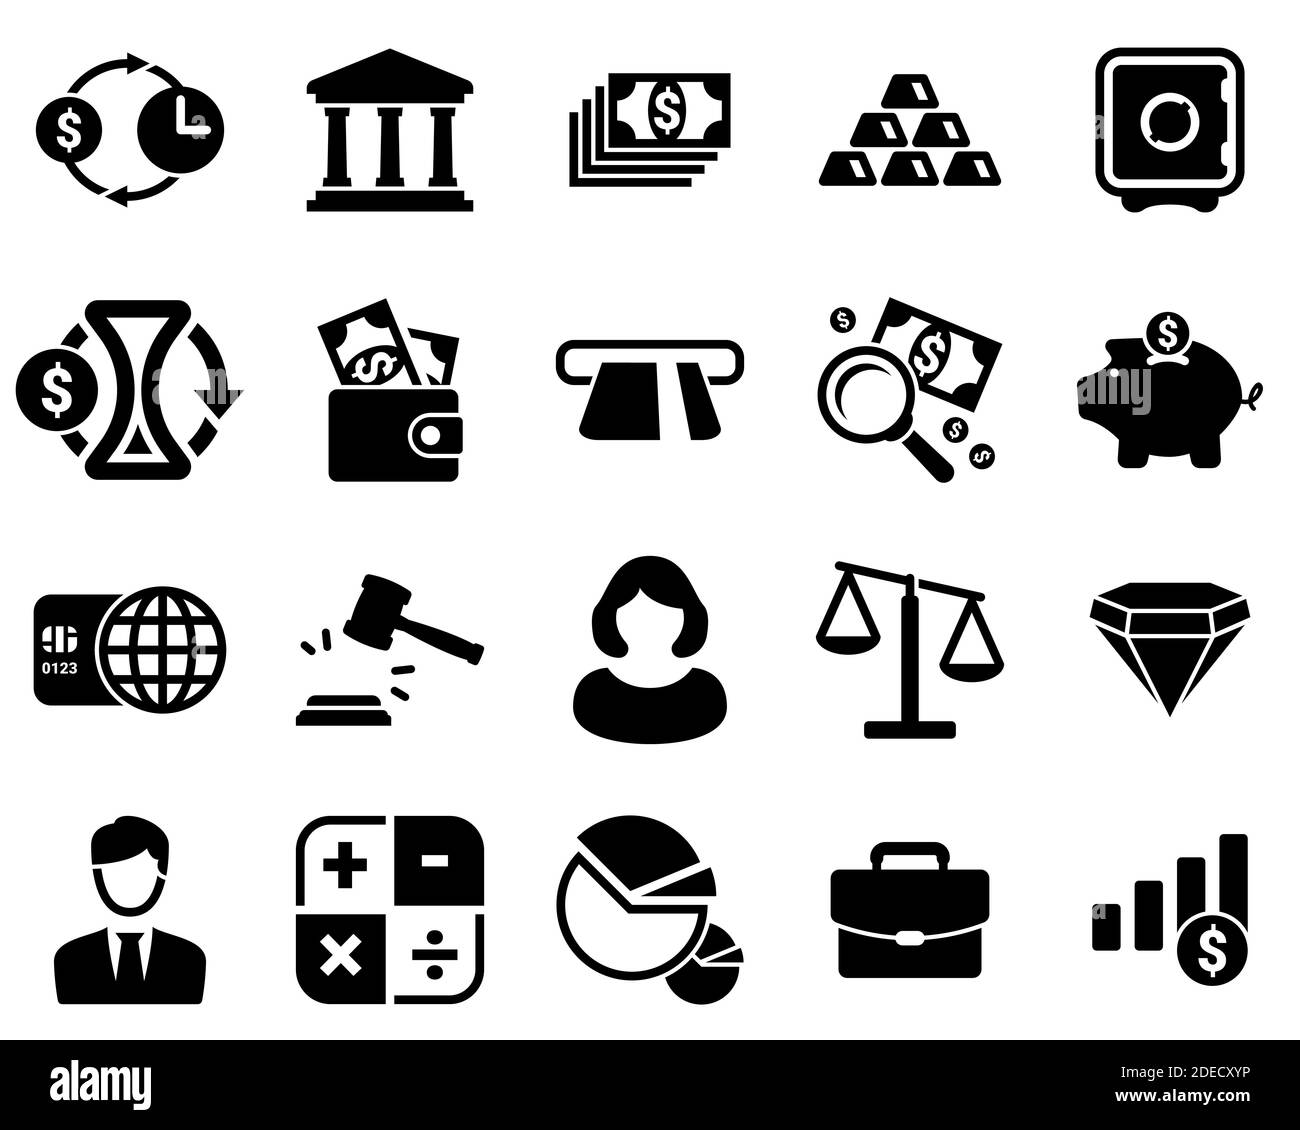 Set of simple icons on a theme Finance, money, bank, savings, vector, design, collection, flat, sign, symbol,element, object, illustration. Black icon Stock Vector